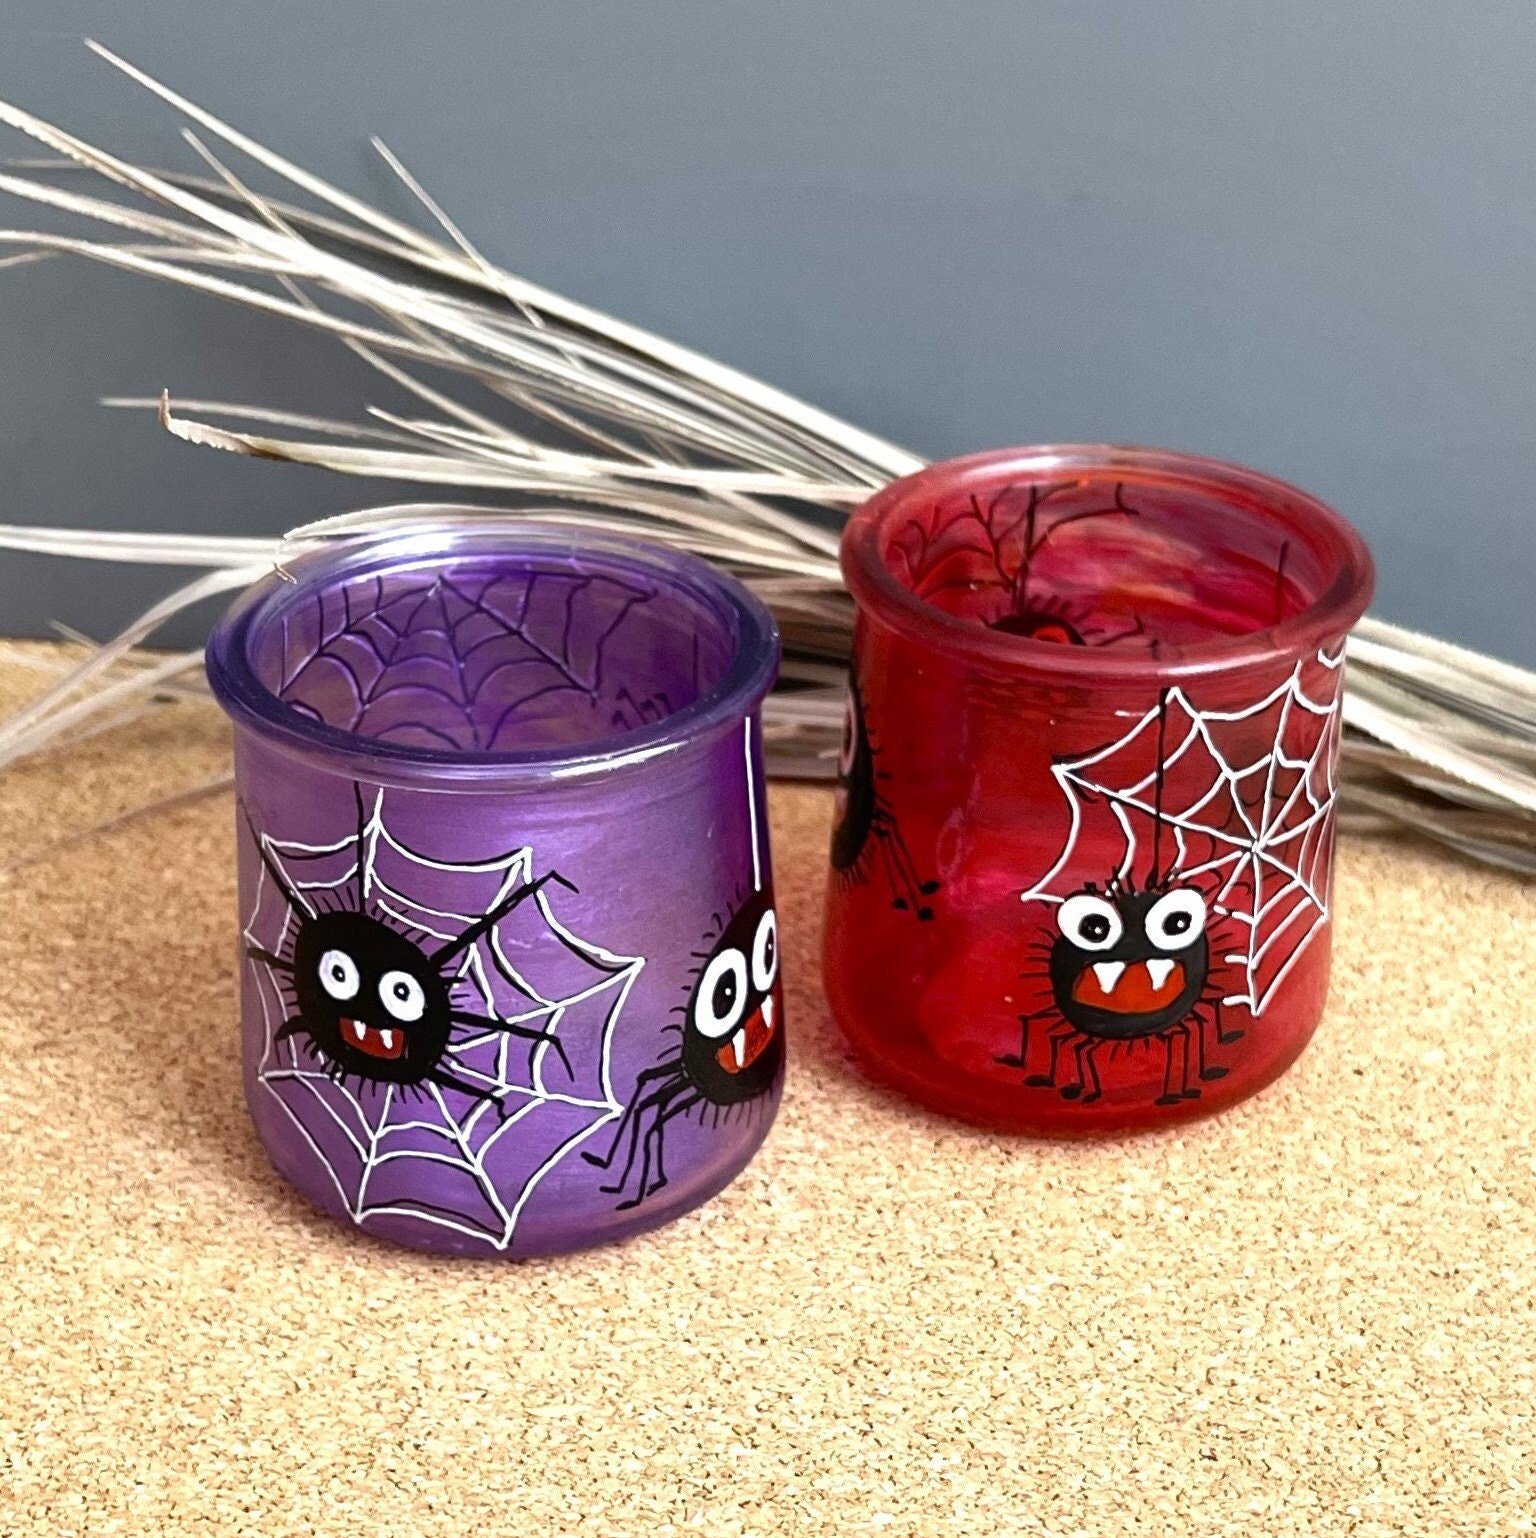 These candle holders were do fun to make. Just buy mighty mend it